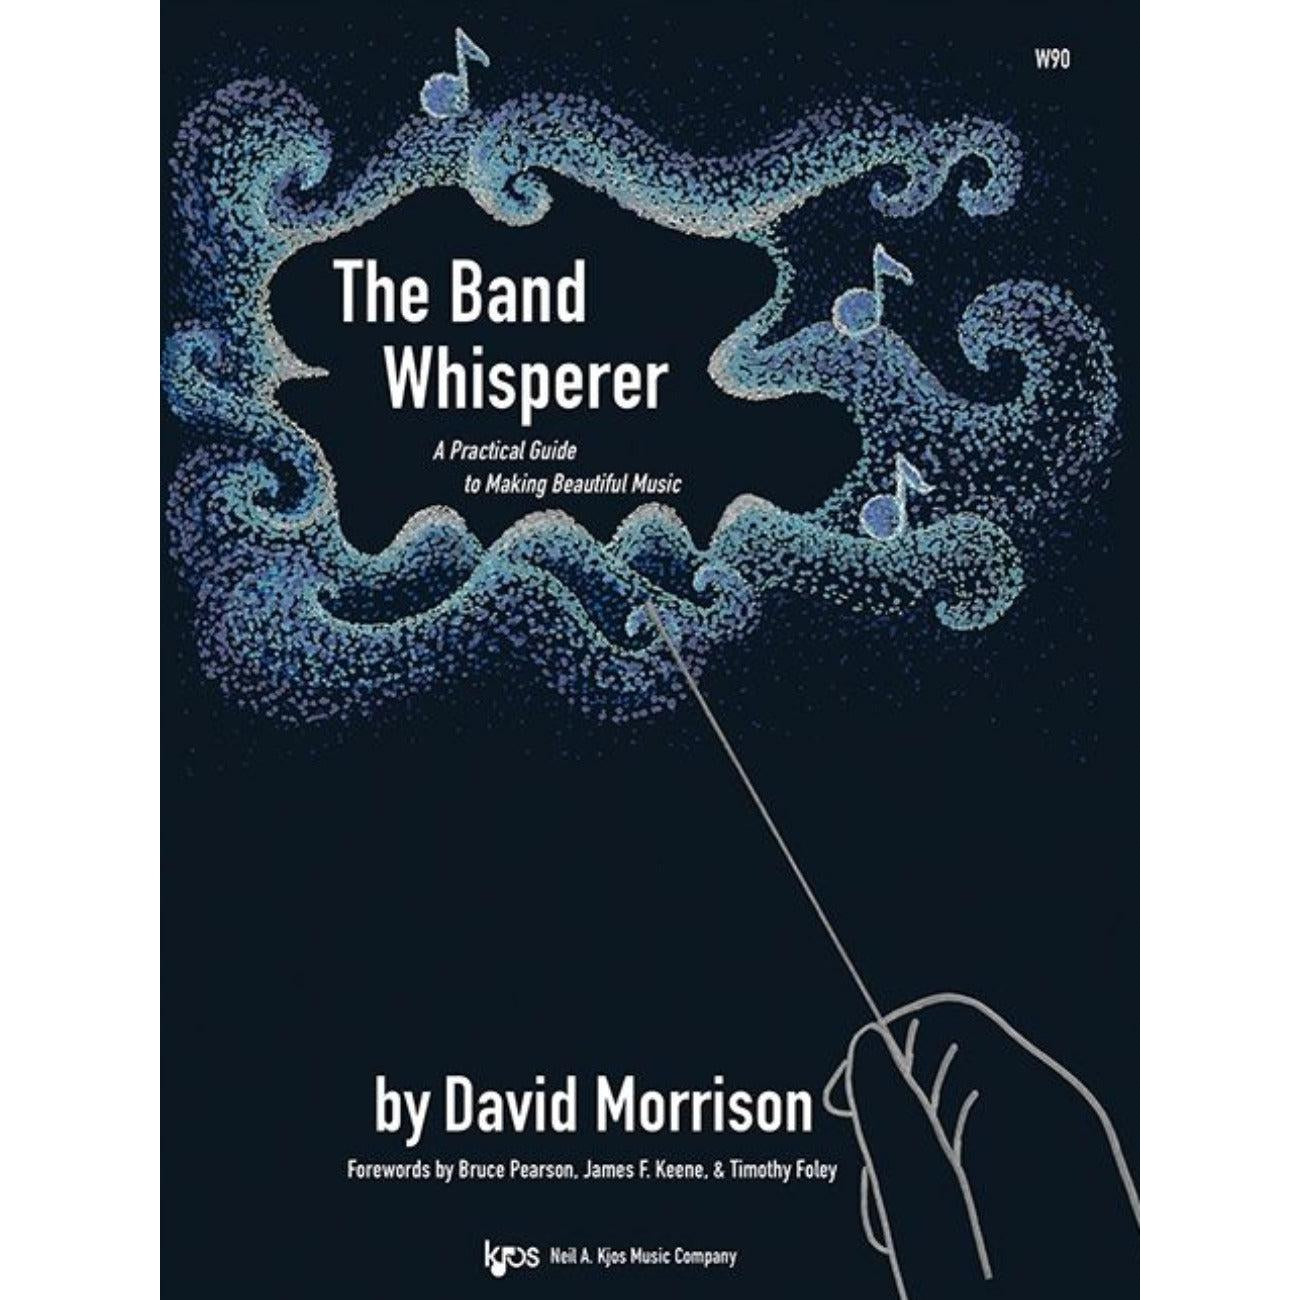 The Band Whisperer by David Morrison - W90-Andy's Music